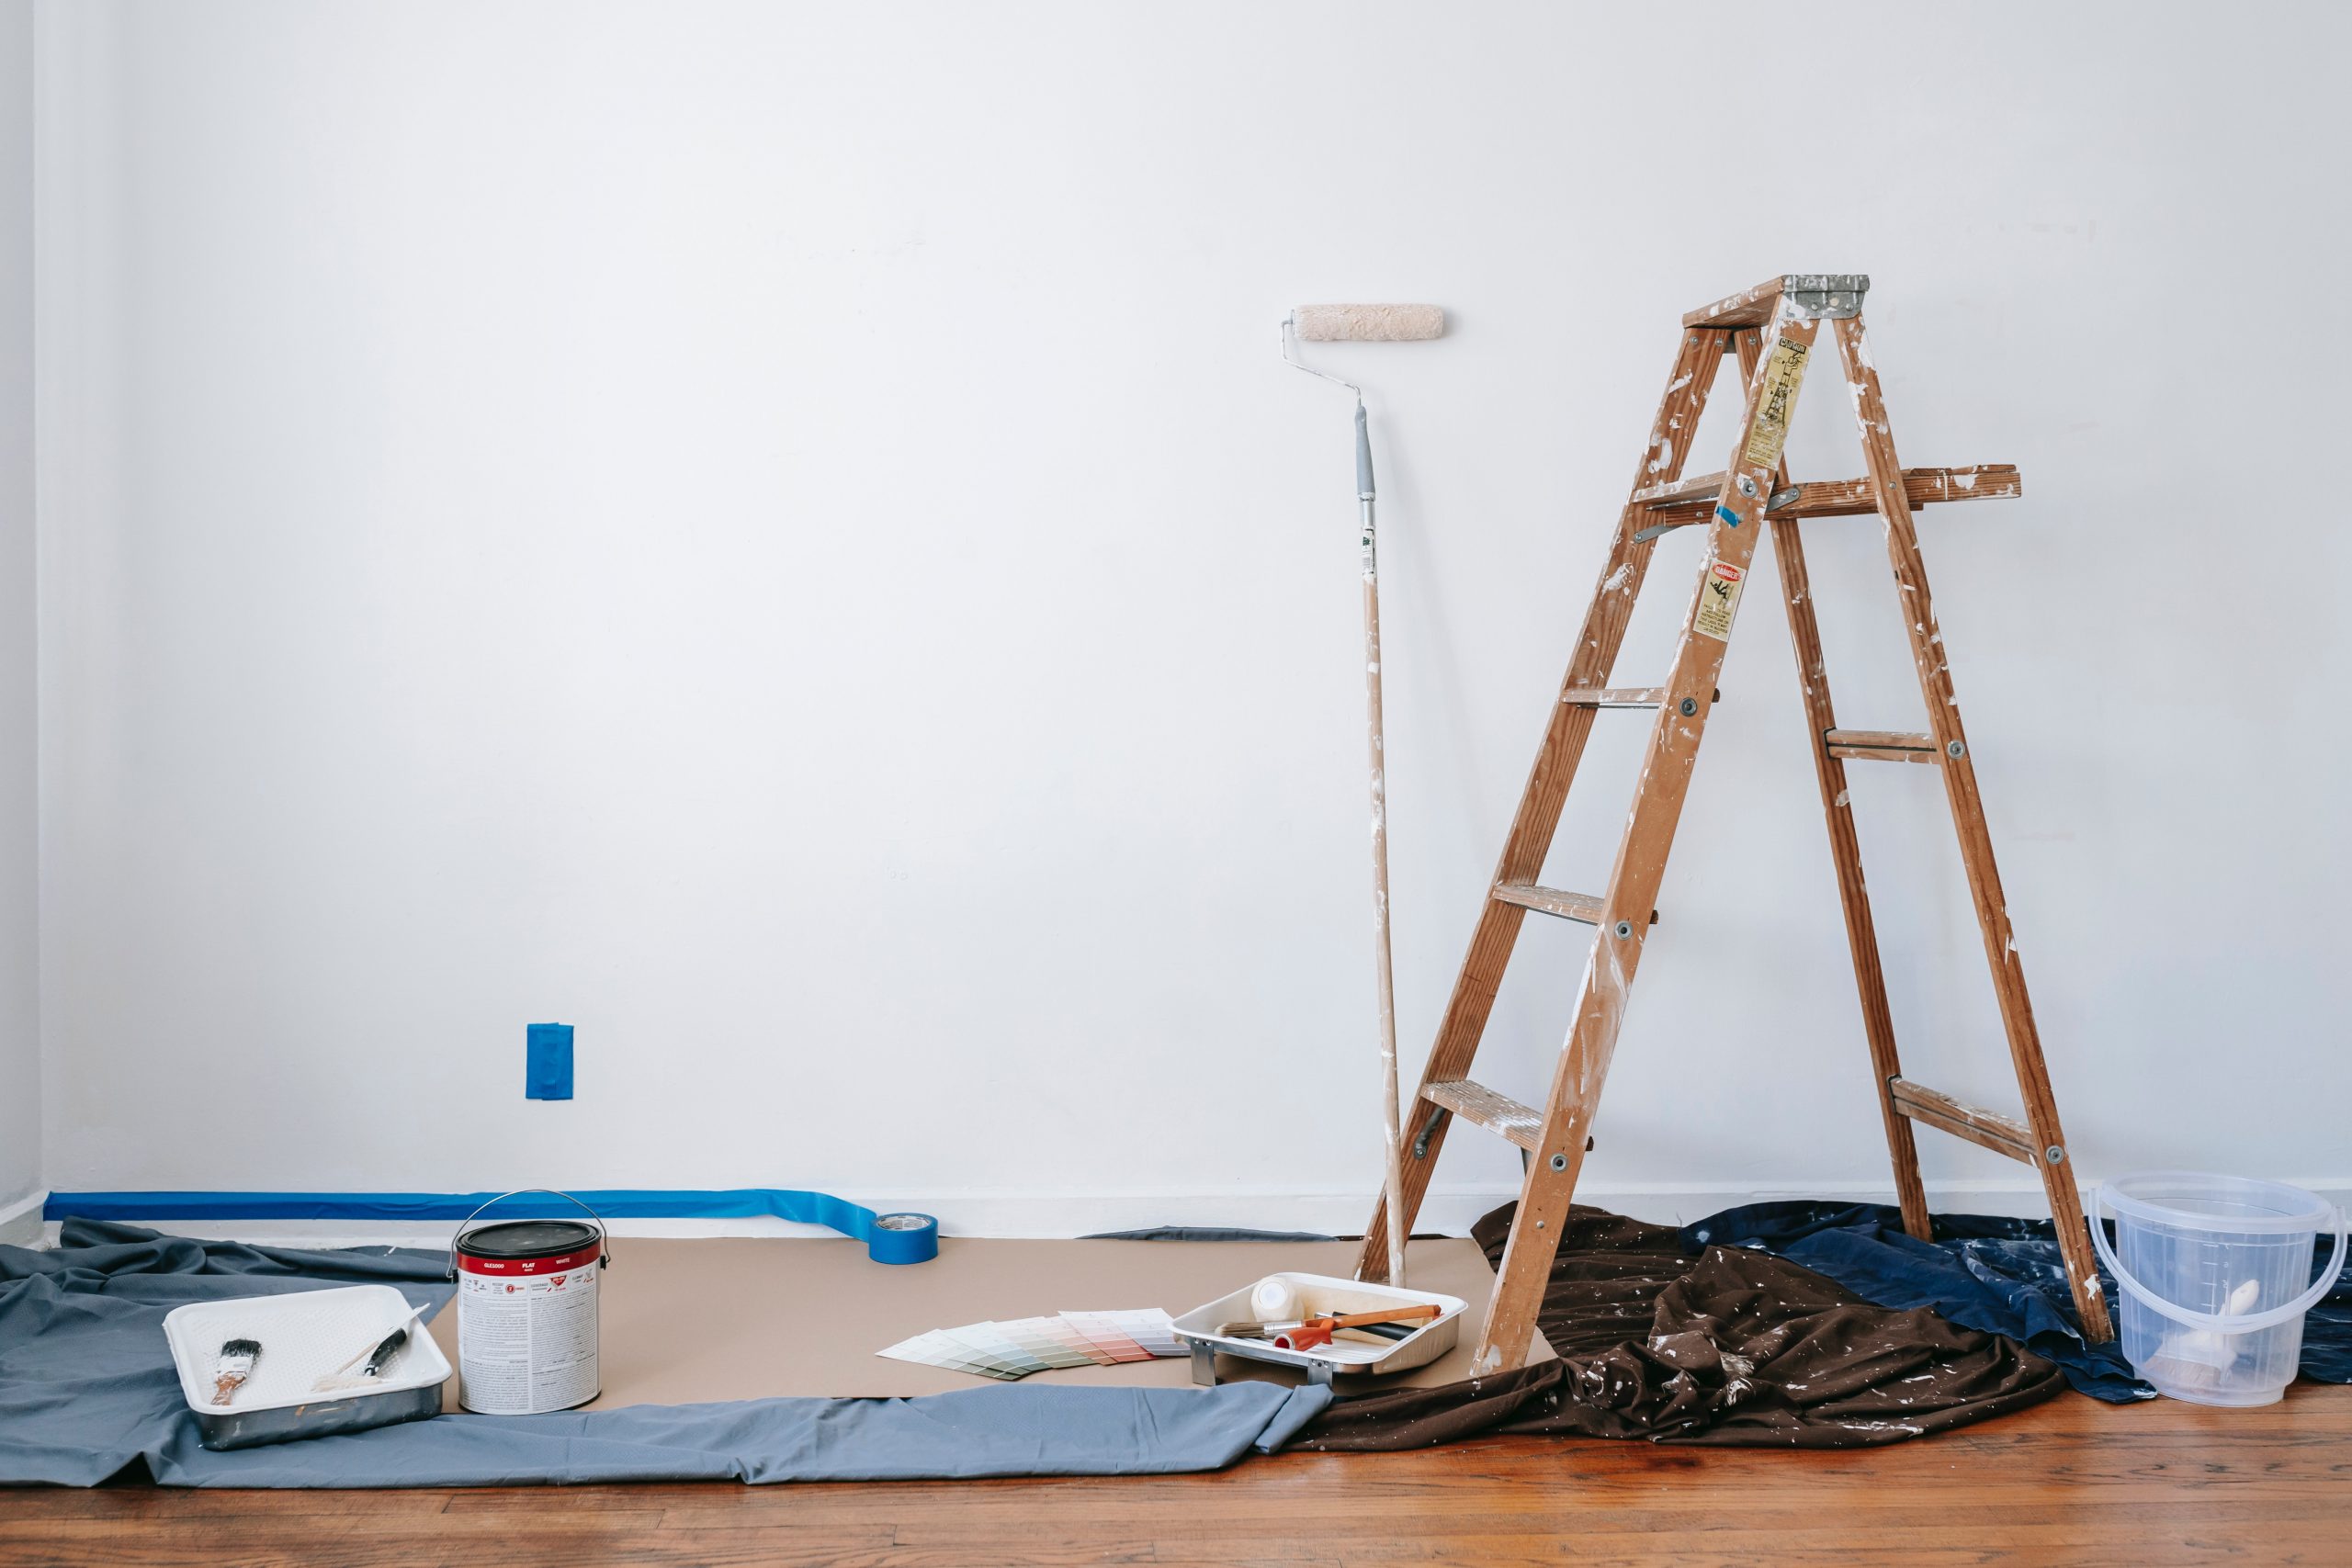 Ask Yourself These Questions Before Buying A Fixer Upper House